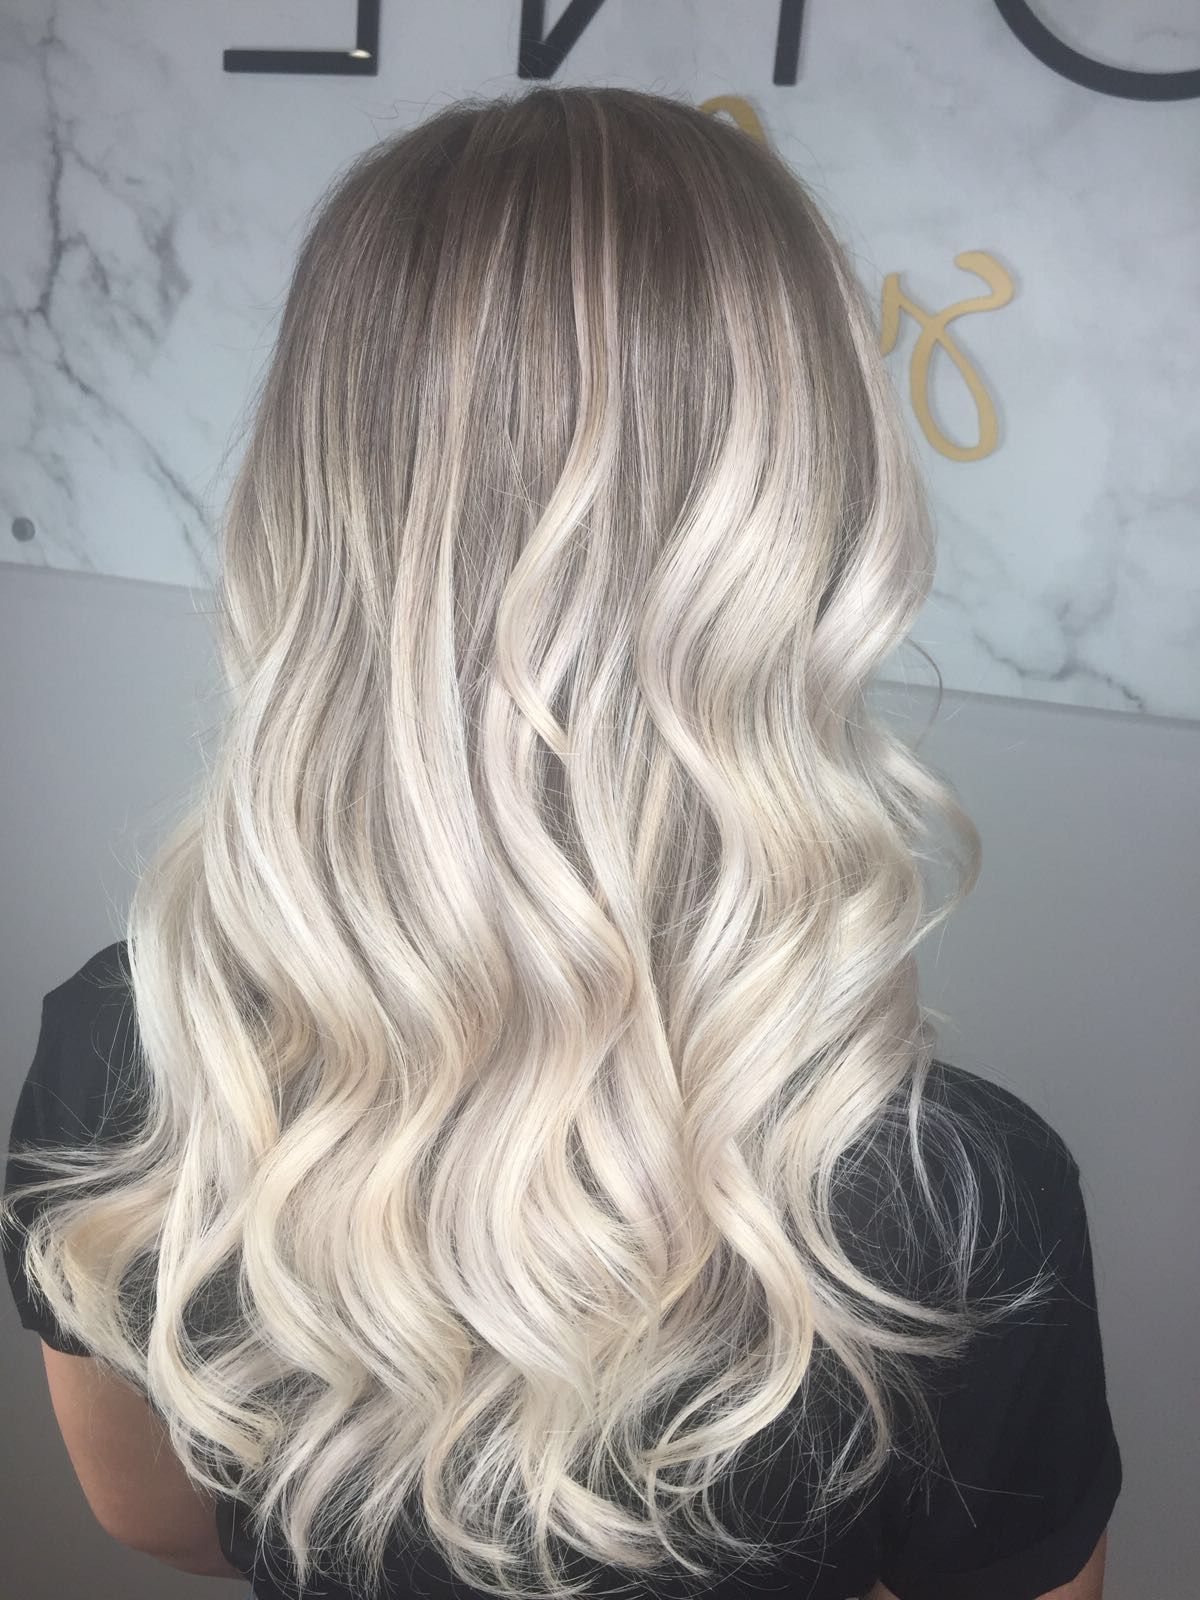 Current Long Dark Hairstyles With Blonde Contour Balayage Inside Ash Blonde Balayage Perth Hair Slaon (View 20 of 20)